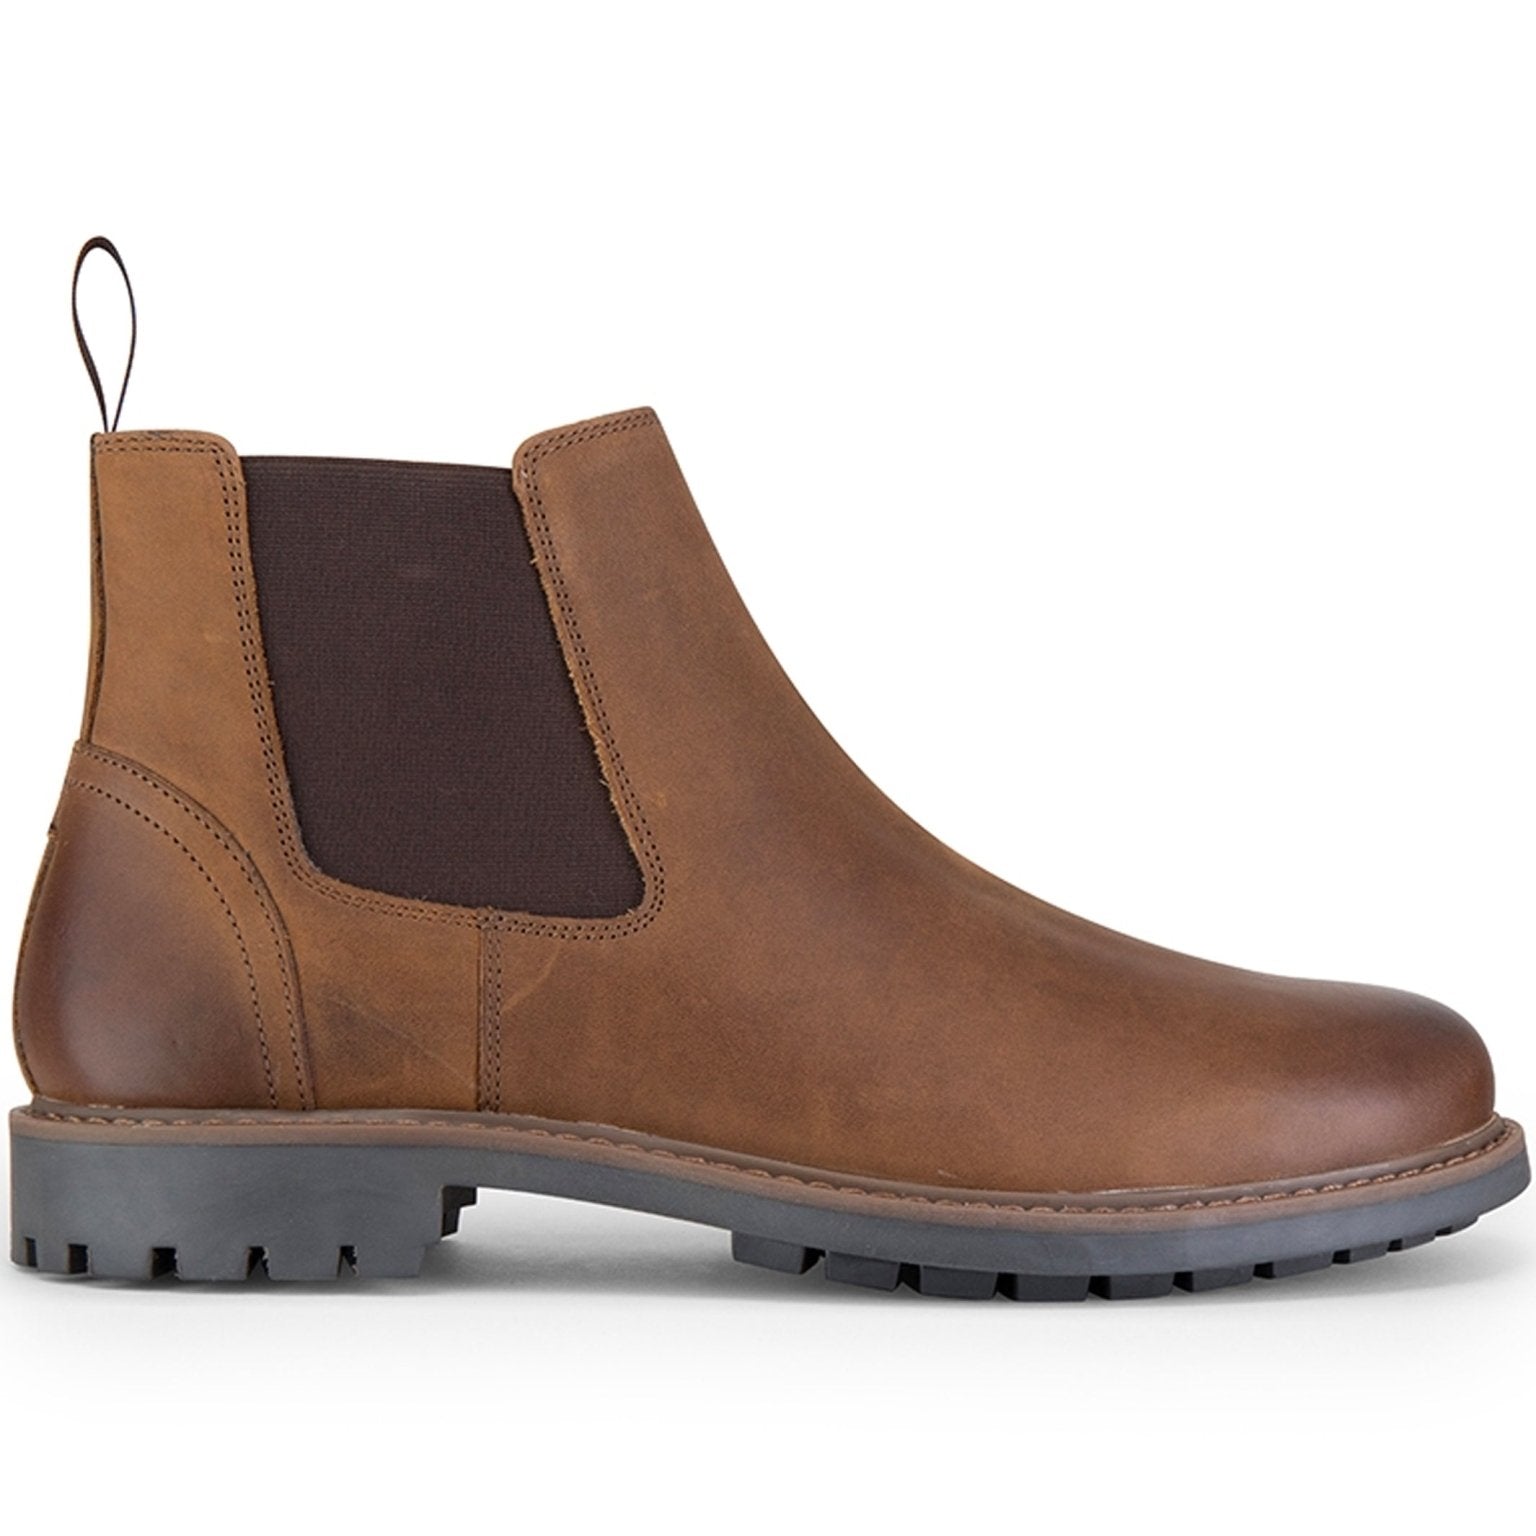 Hoggs of Fife Hoggs of Fife - Mens Chelsea Boot / Dealer Boot - Banff Country Classic Boots